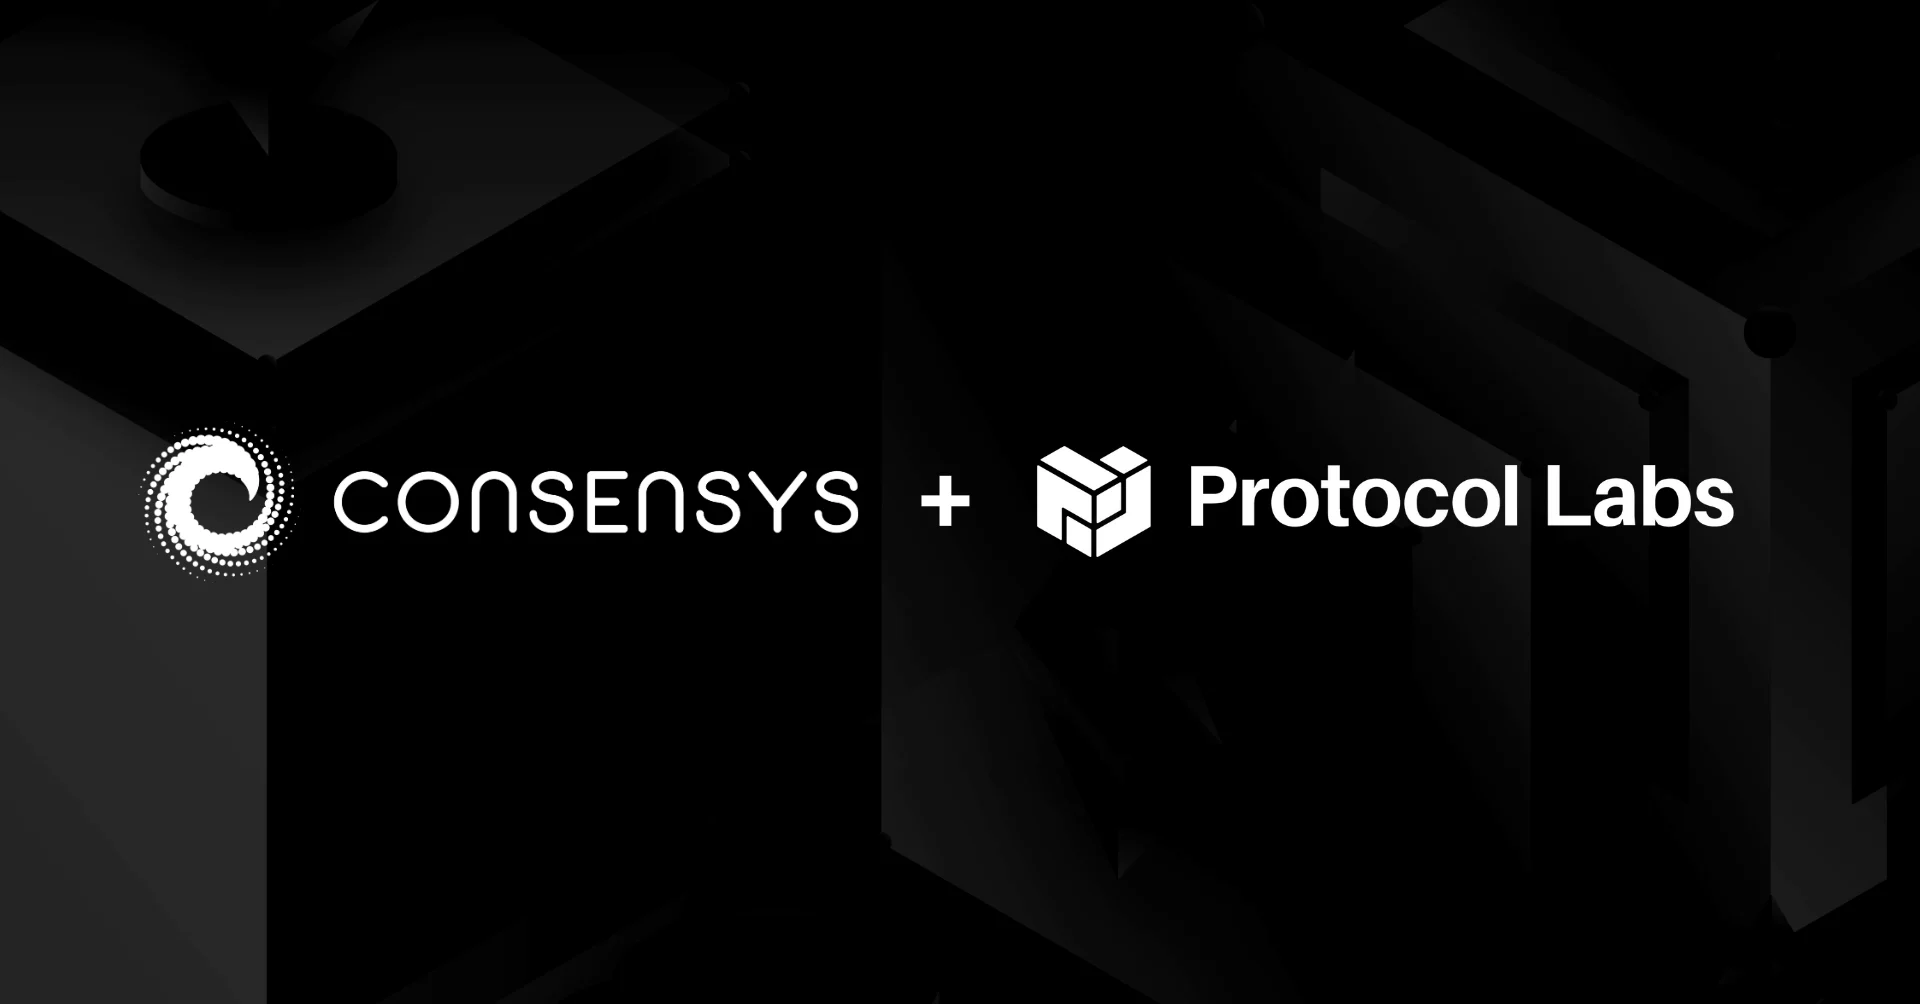 Image: Protocol Labs Collaborates with ConsenSys to Bring Filecoin to Ethereum